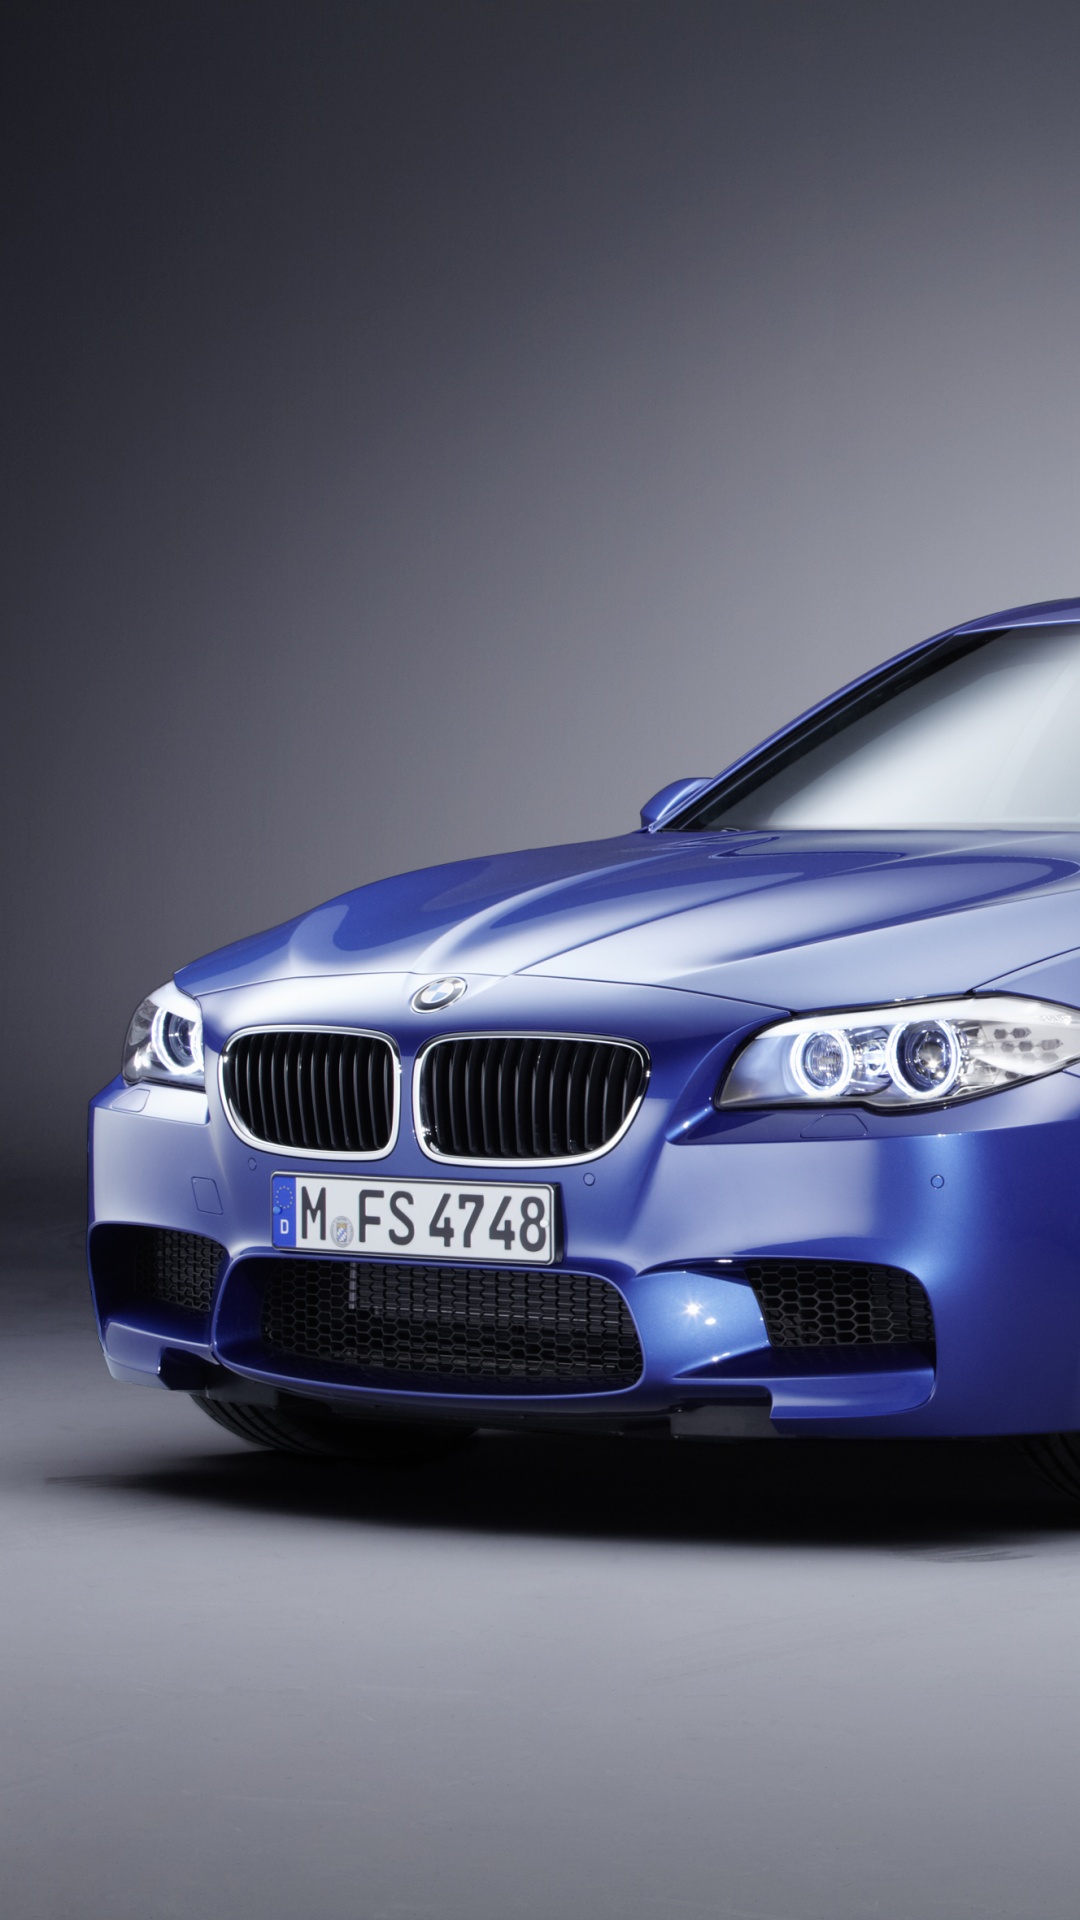 Blau Bmw m3 Coupe. Wallpaper in 1080x1920 Resolution